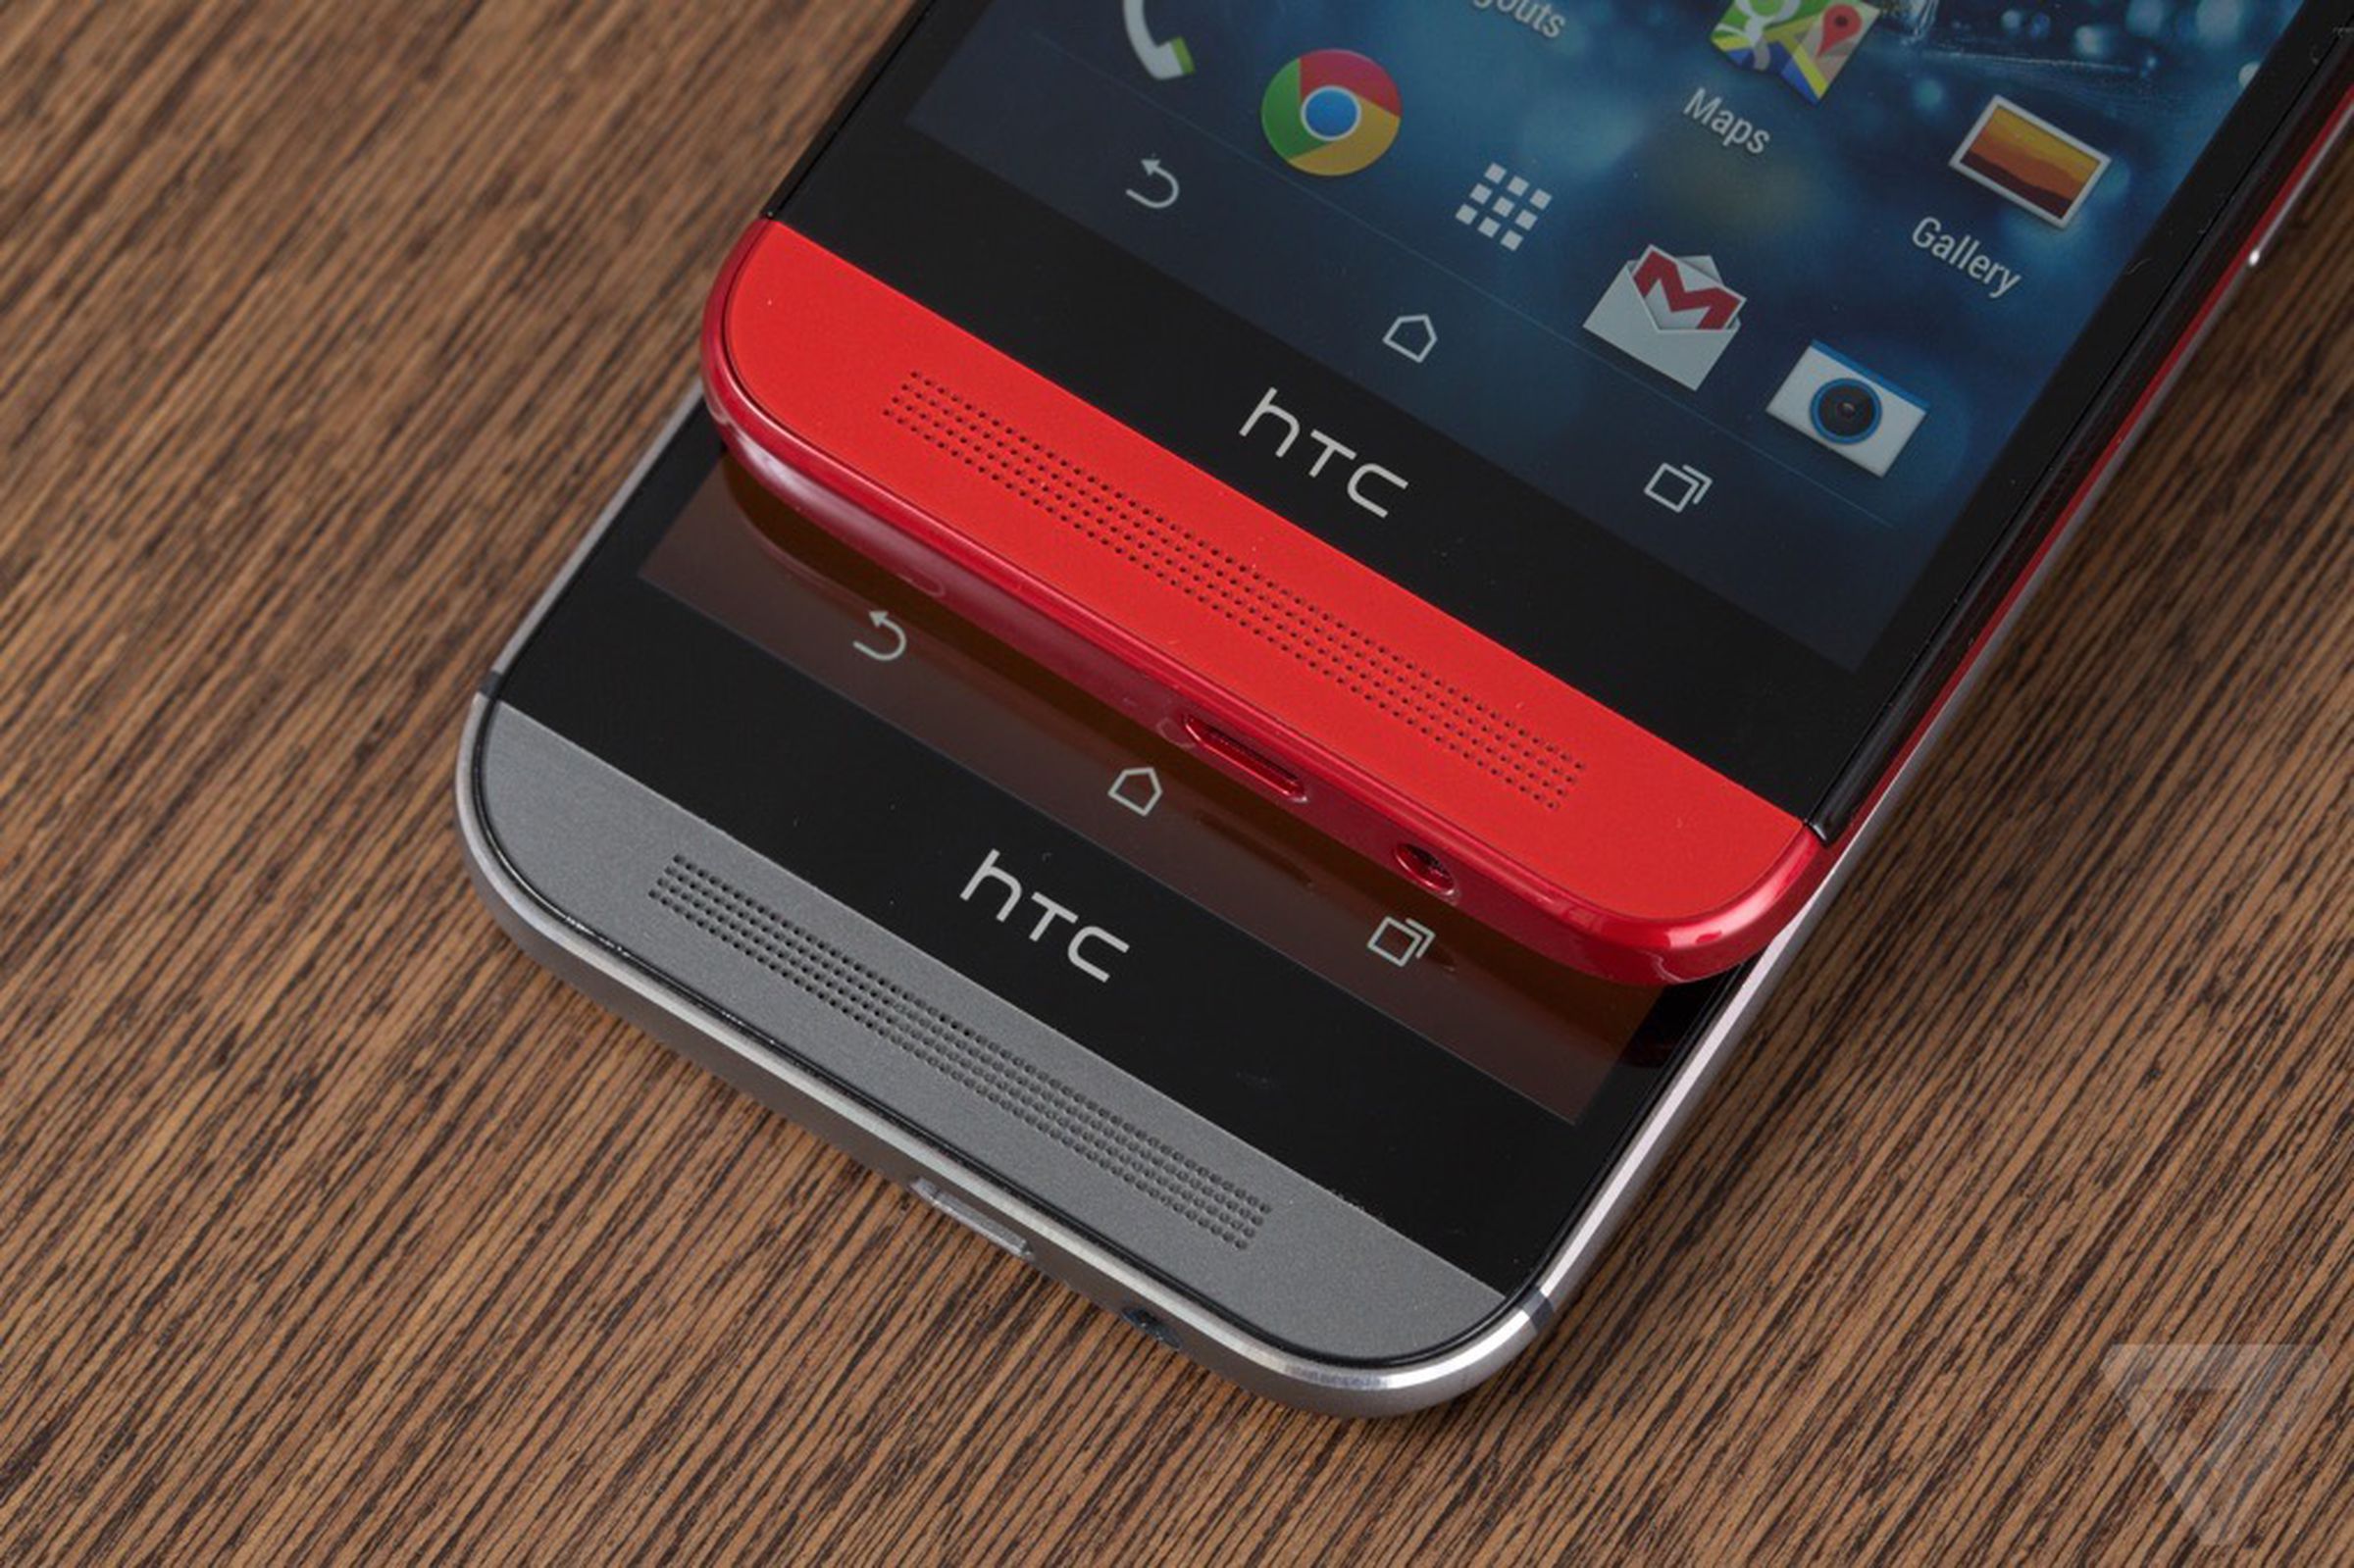 HTC One E8 hands-on photos